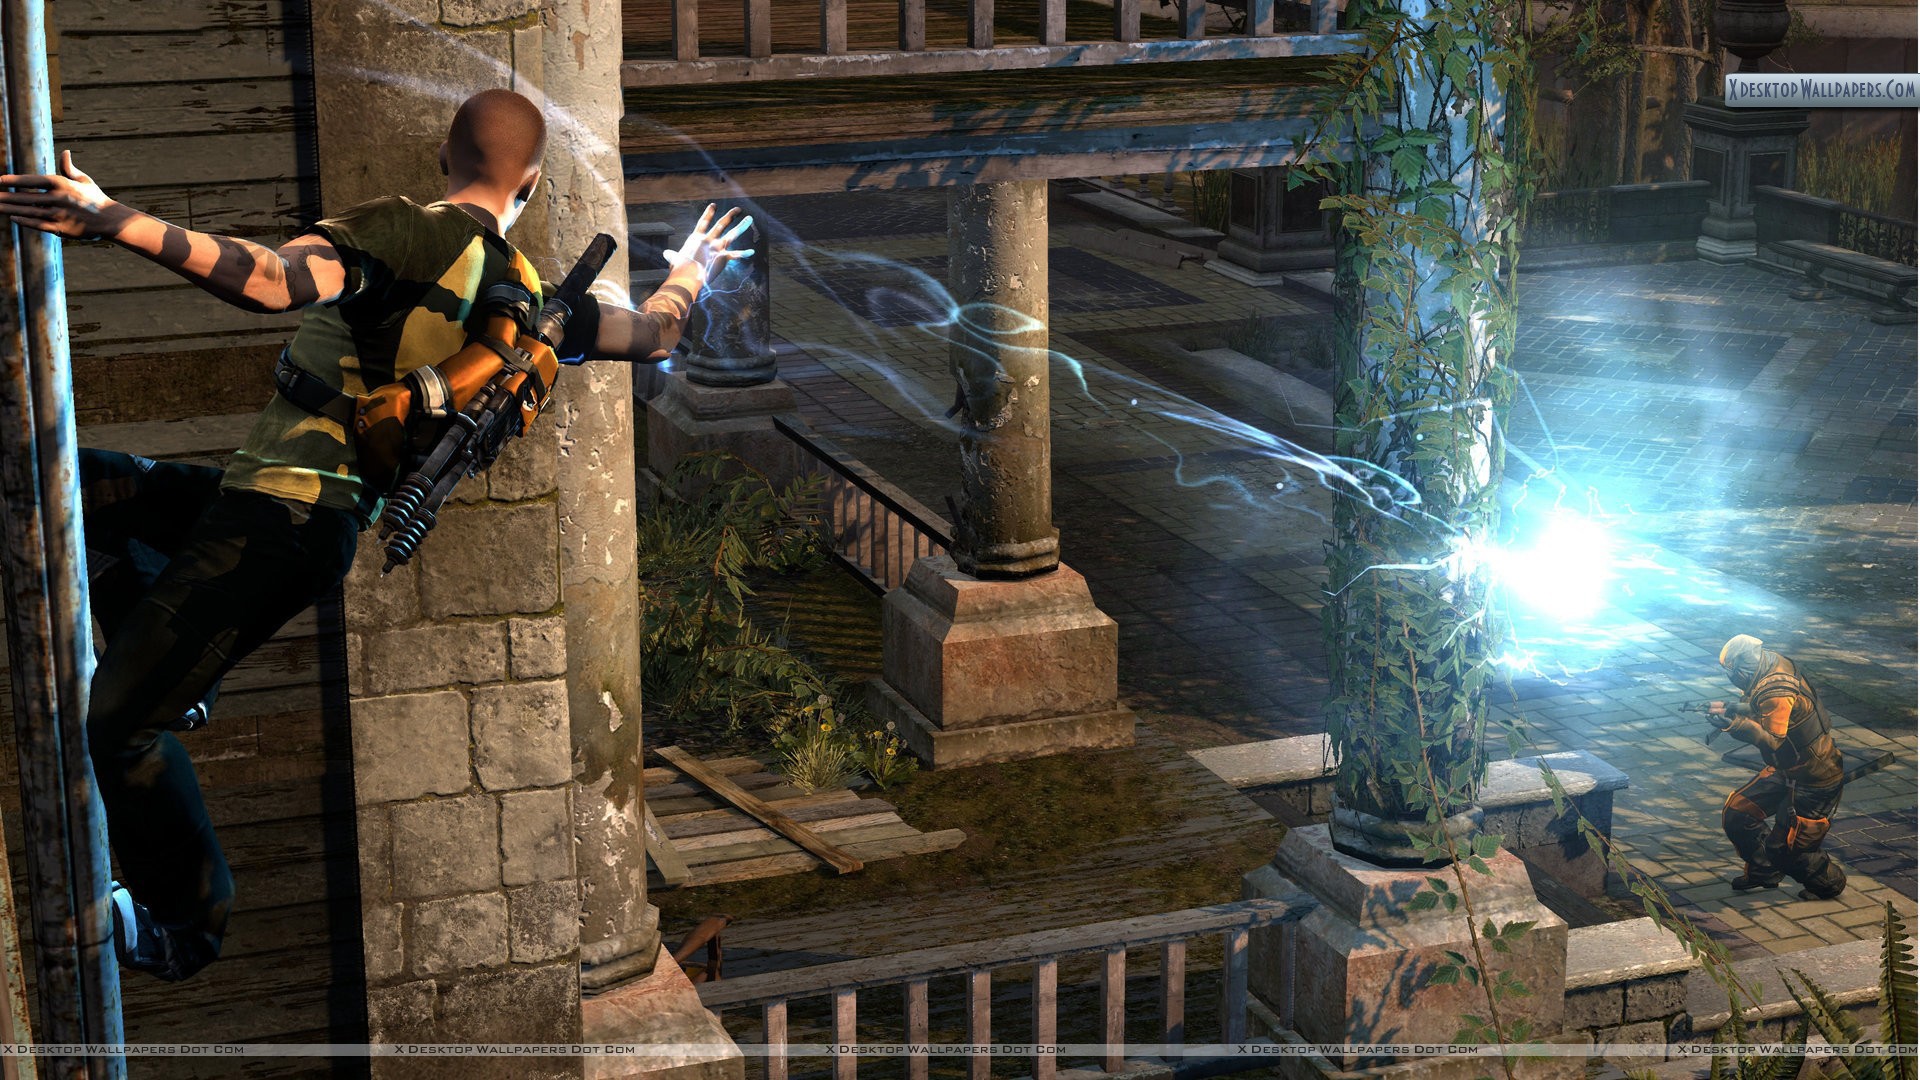 inFAMOUS 2 Wallpapers, Photos & Images in HD